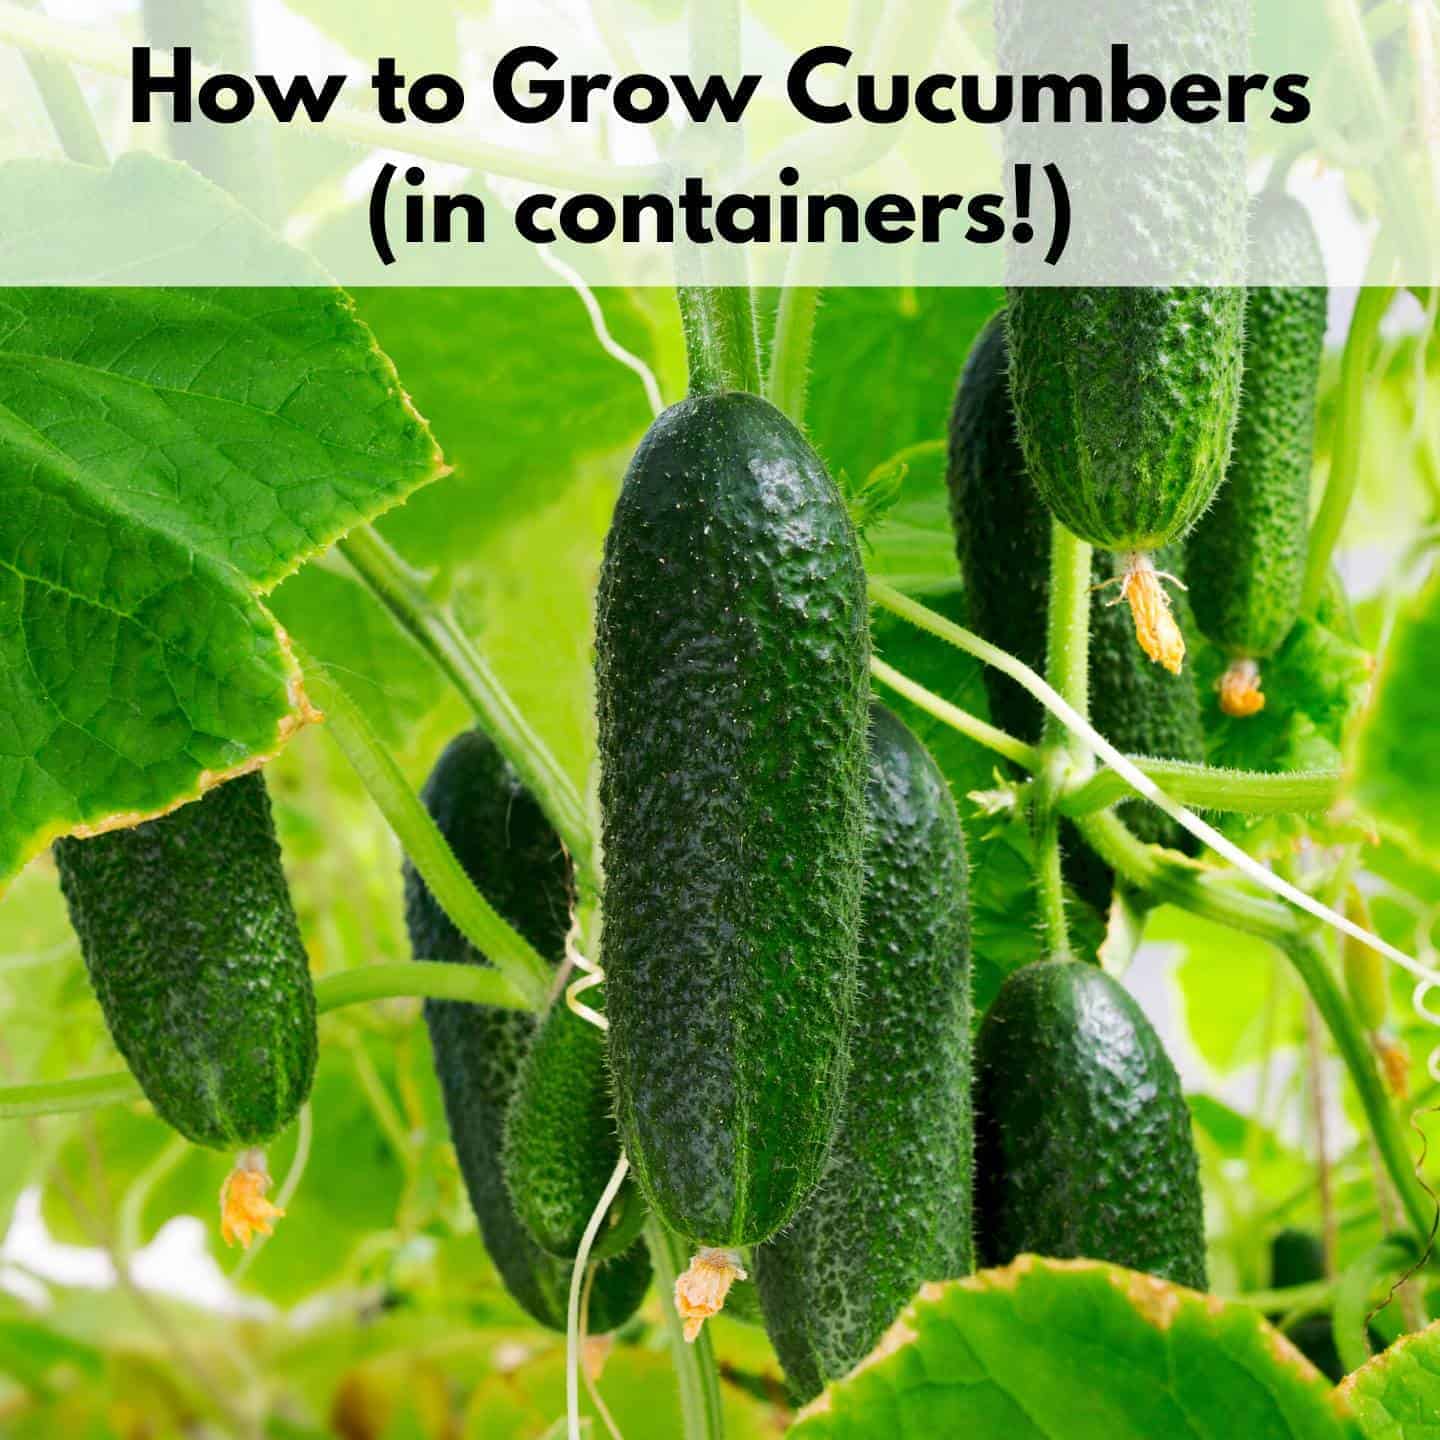 https://natashalh.com/wp-content/uploads/2023/01/grow-cucumbers-in-containers.jpg